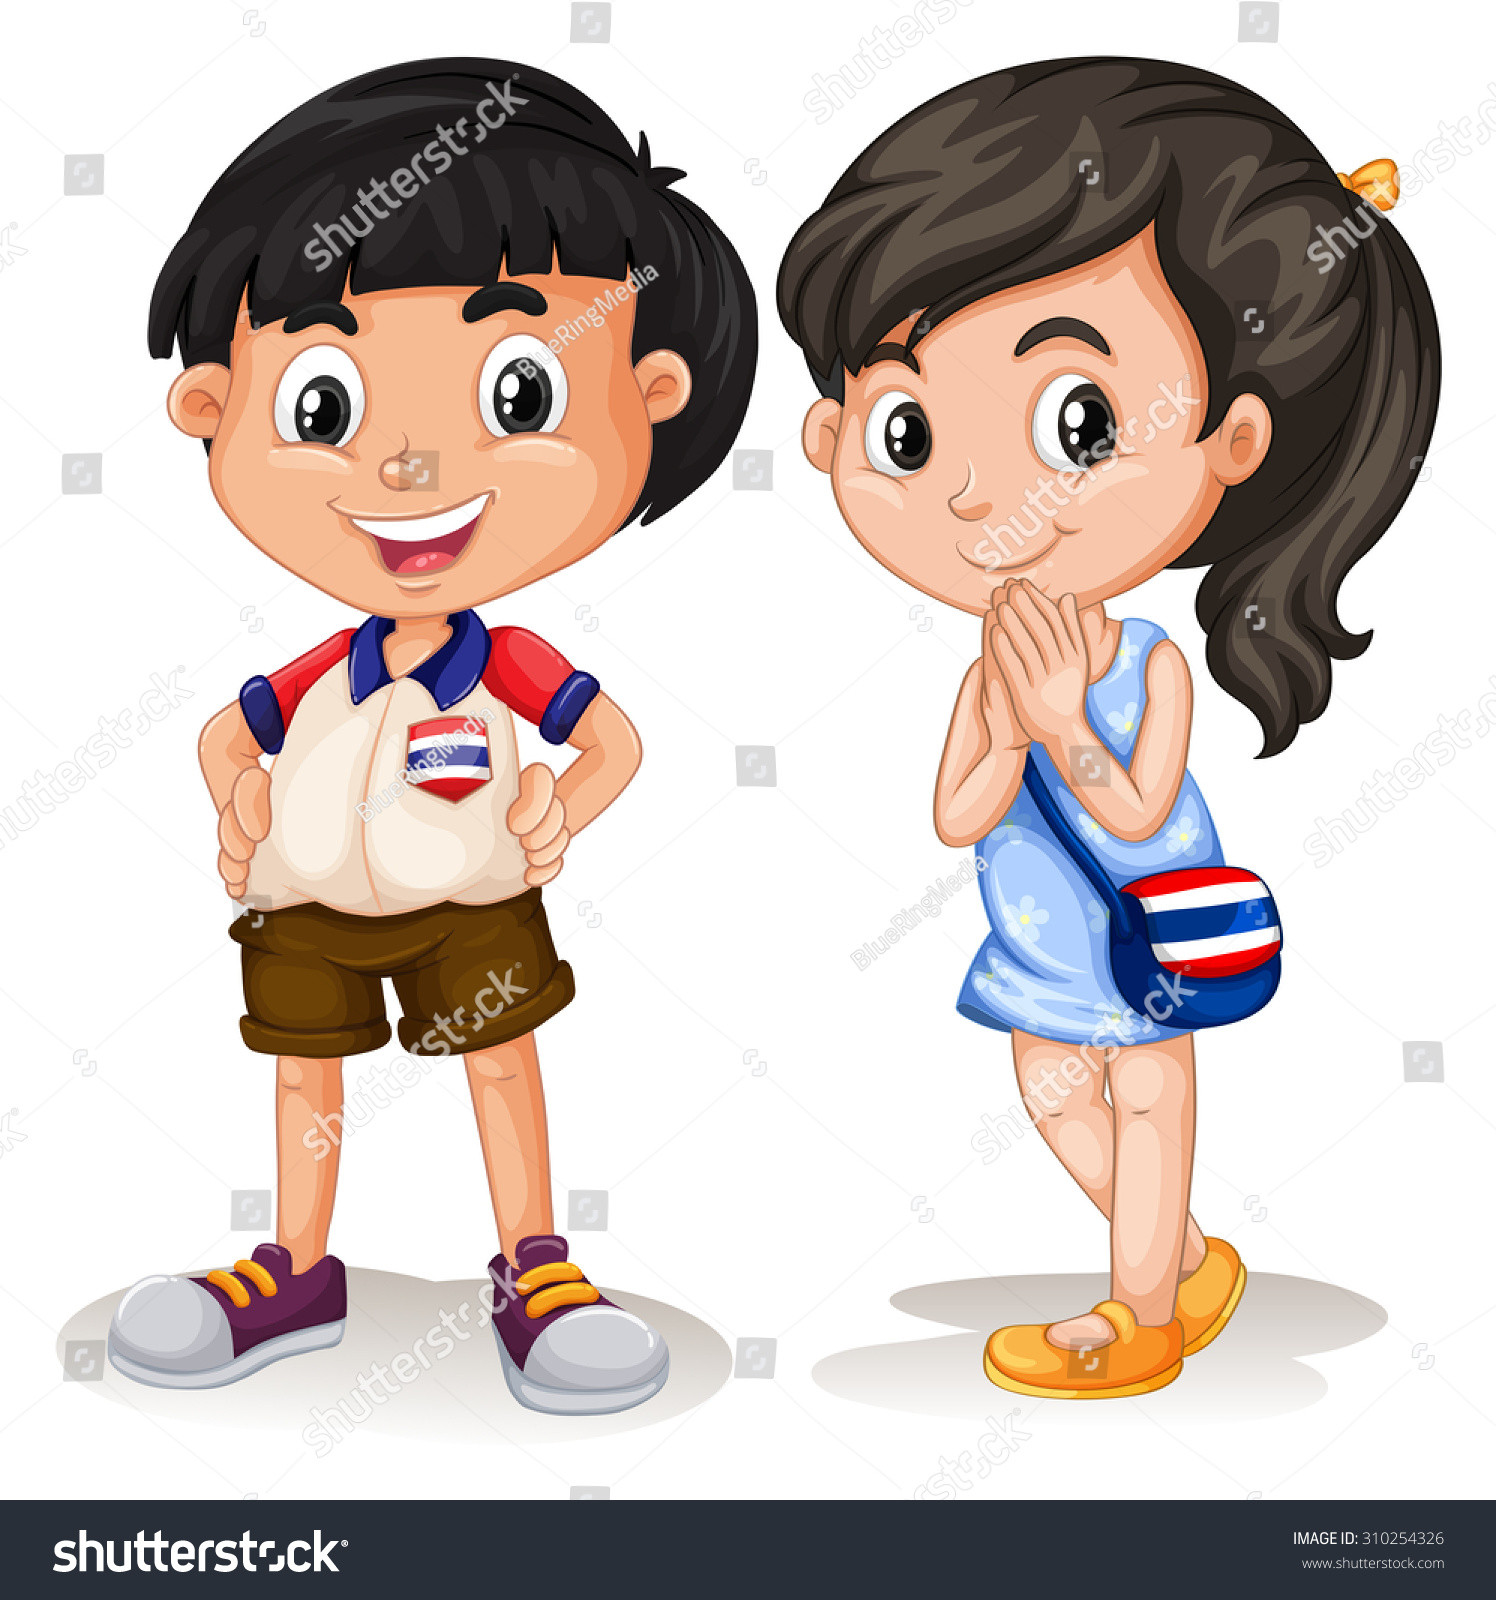 boy and girl clipart free - photo #24